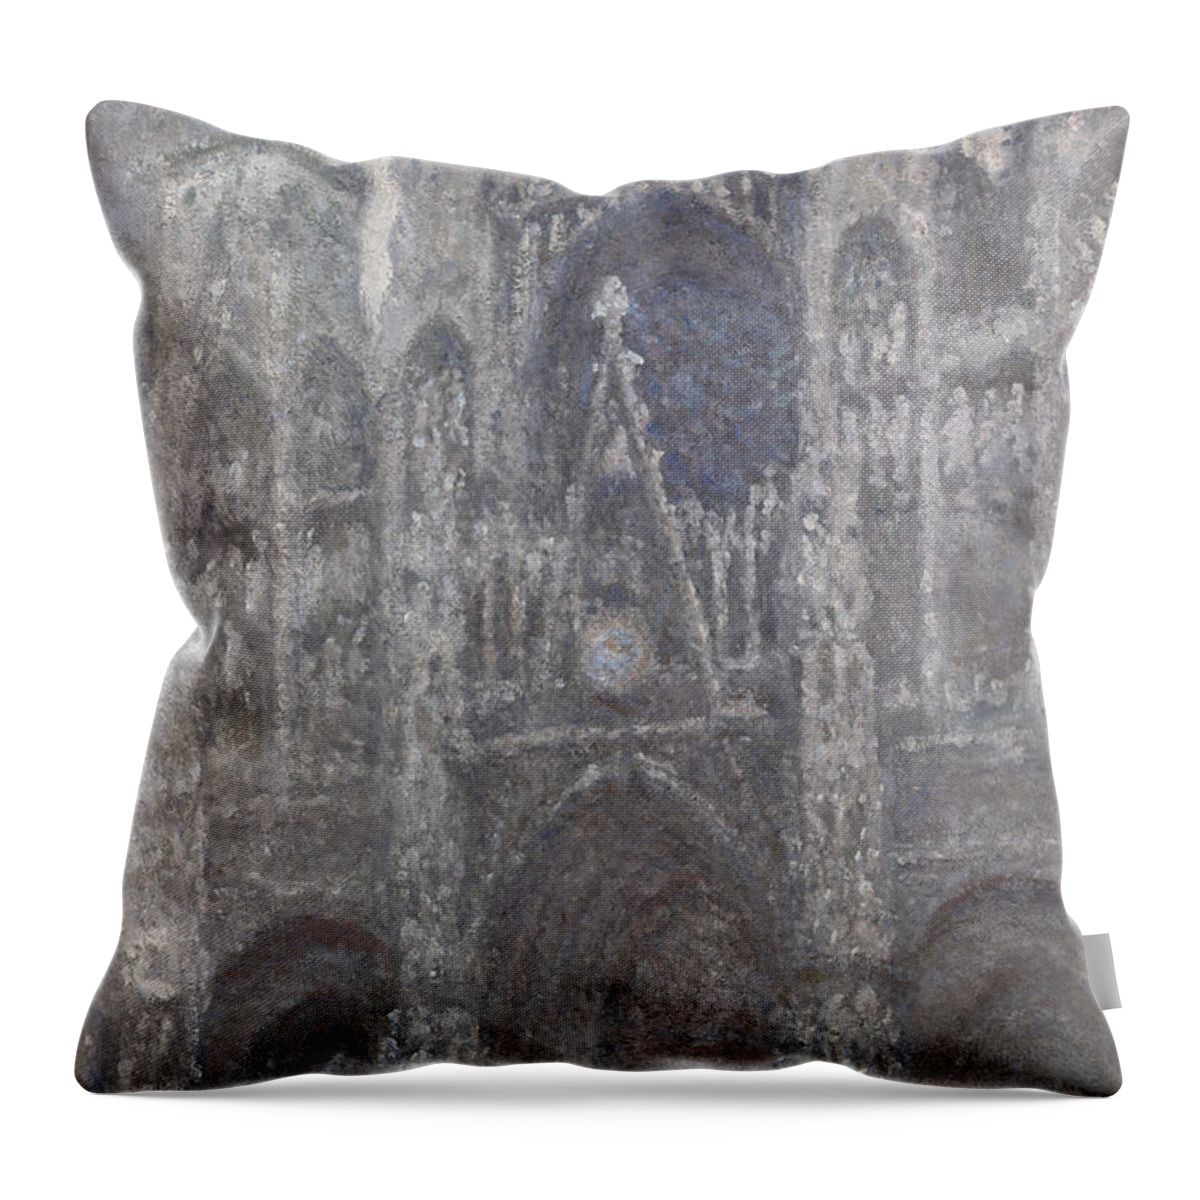 Claude Monet Throw Pillow featuring the painting The Cathedral In Rouen by Claude Monet